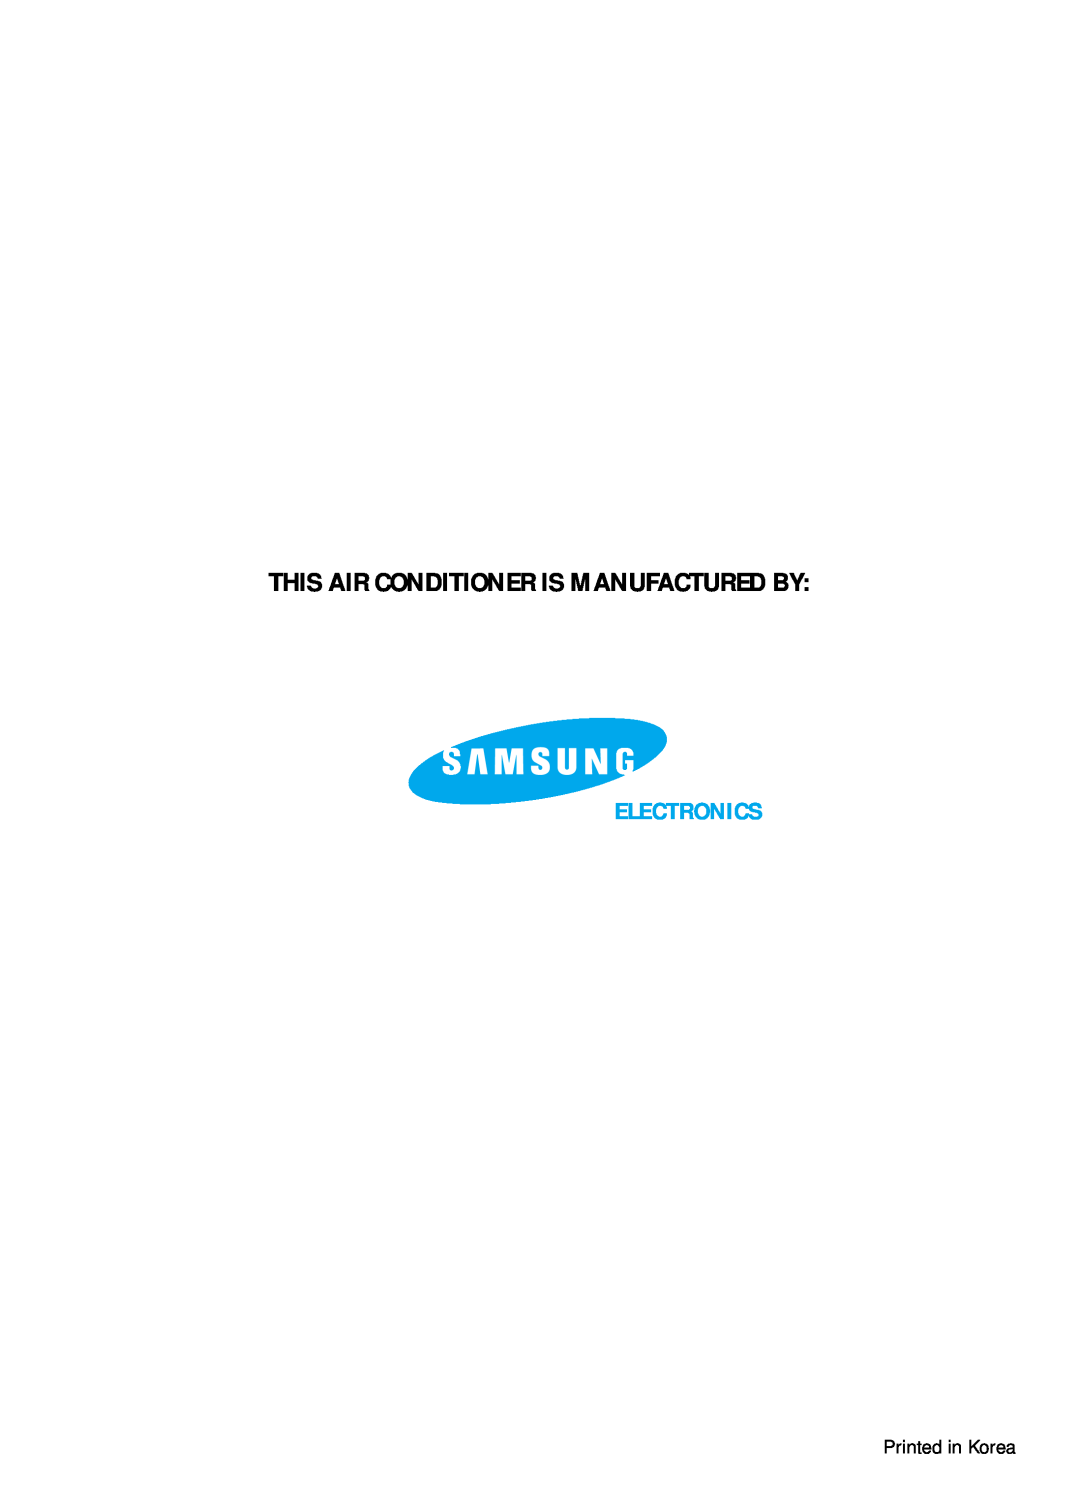 Samsung AQV09F2VE/D, AQV12F2VE/D manual This Air Conditioner Is Manufactured By, Electronics 